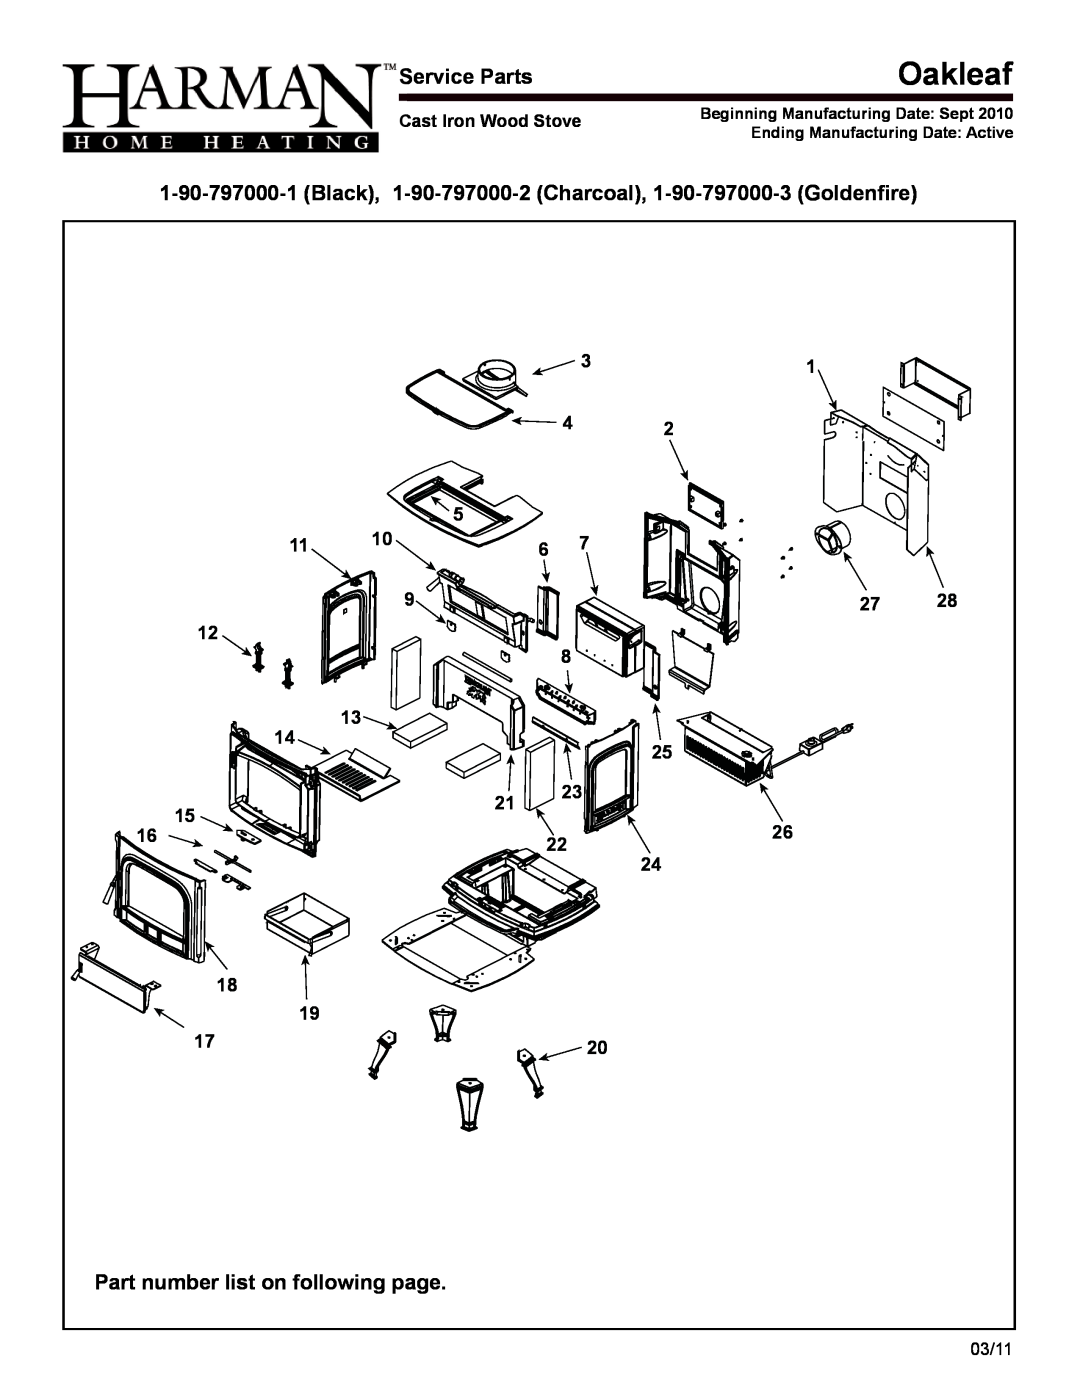 Harman Stove Company 1-90-797000 manual Oakleaf, service Parts, Part number list on following page, 11 12 14 15 16 18 